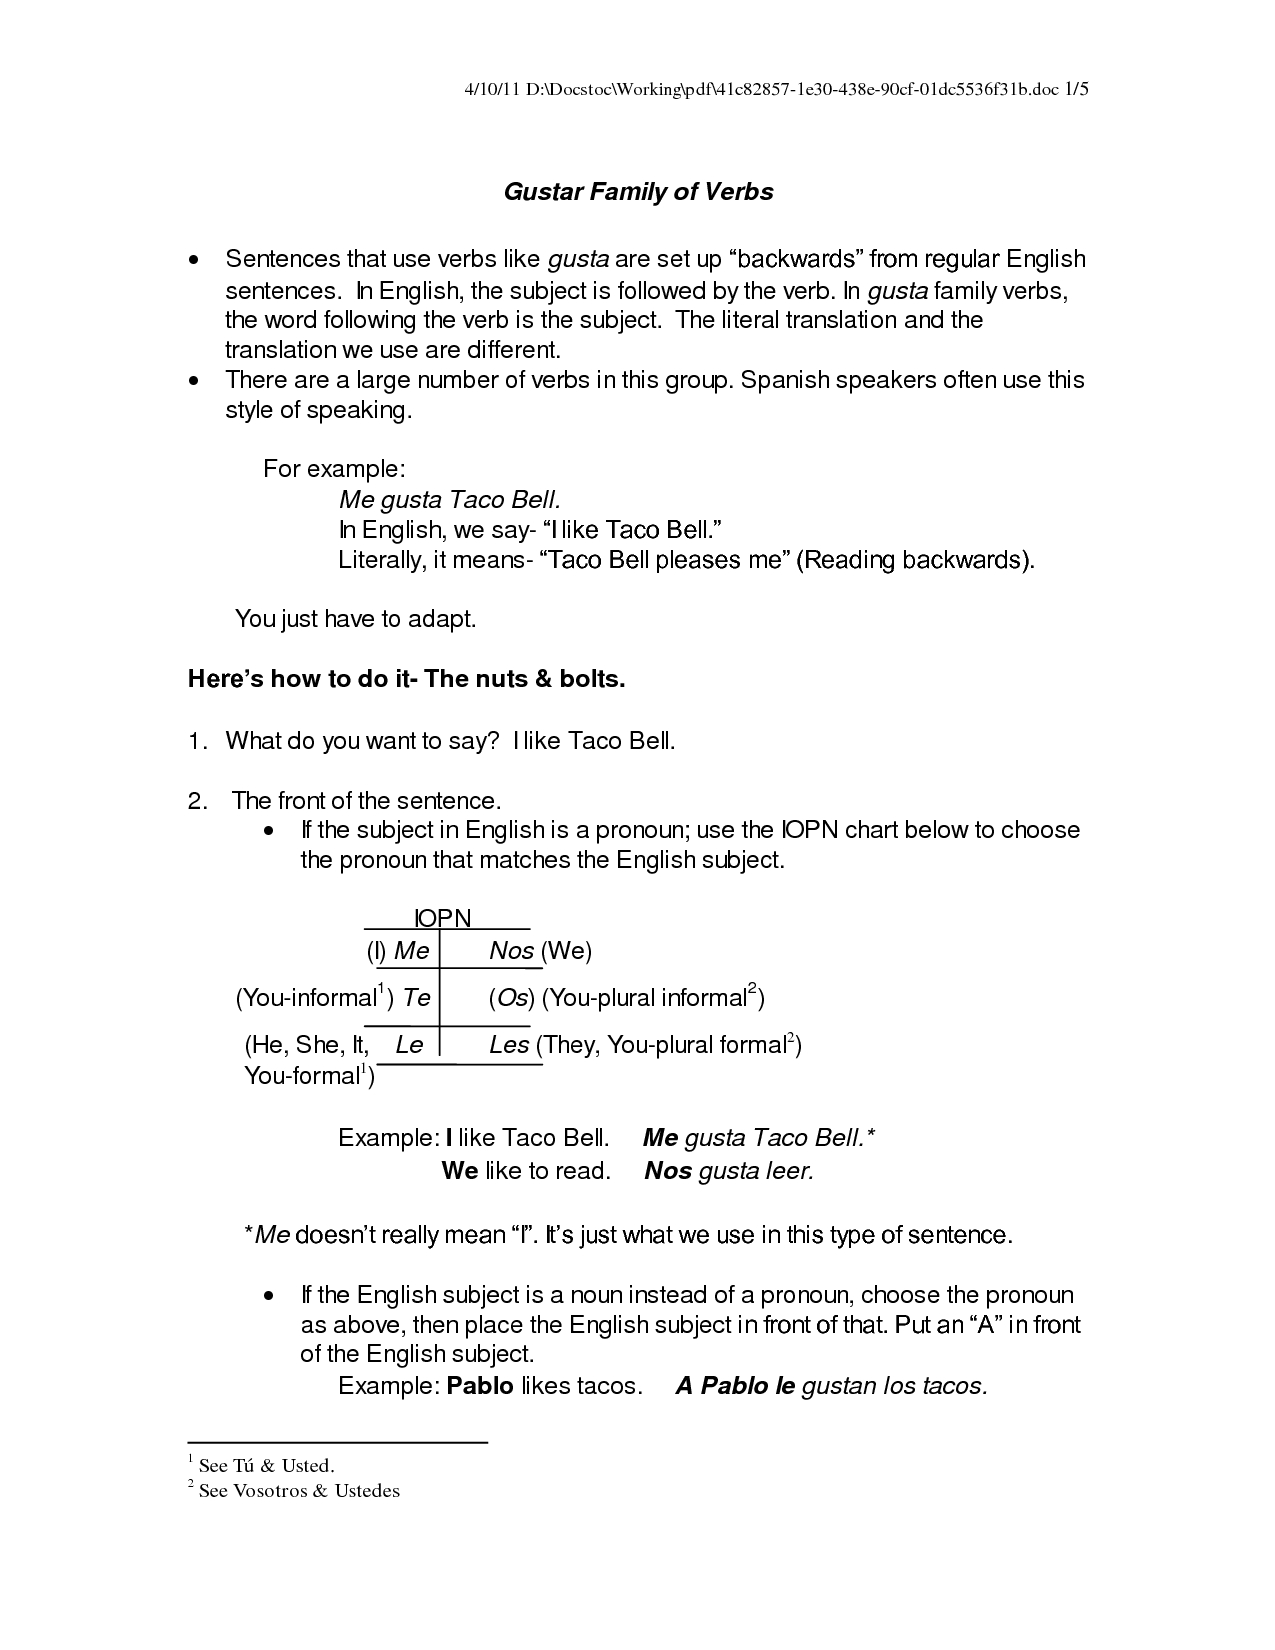 Gustar Worksheets  Free Worksheets Library  Download And Print